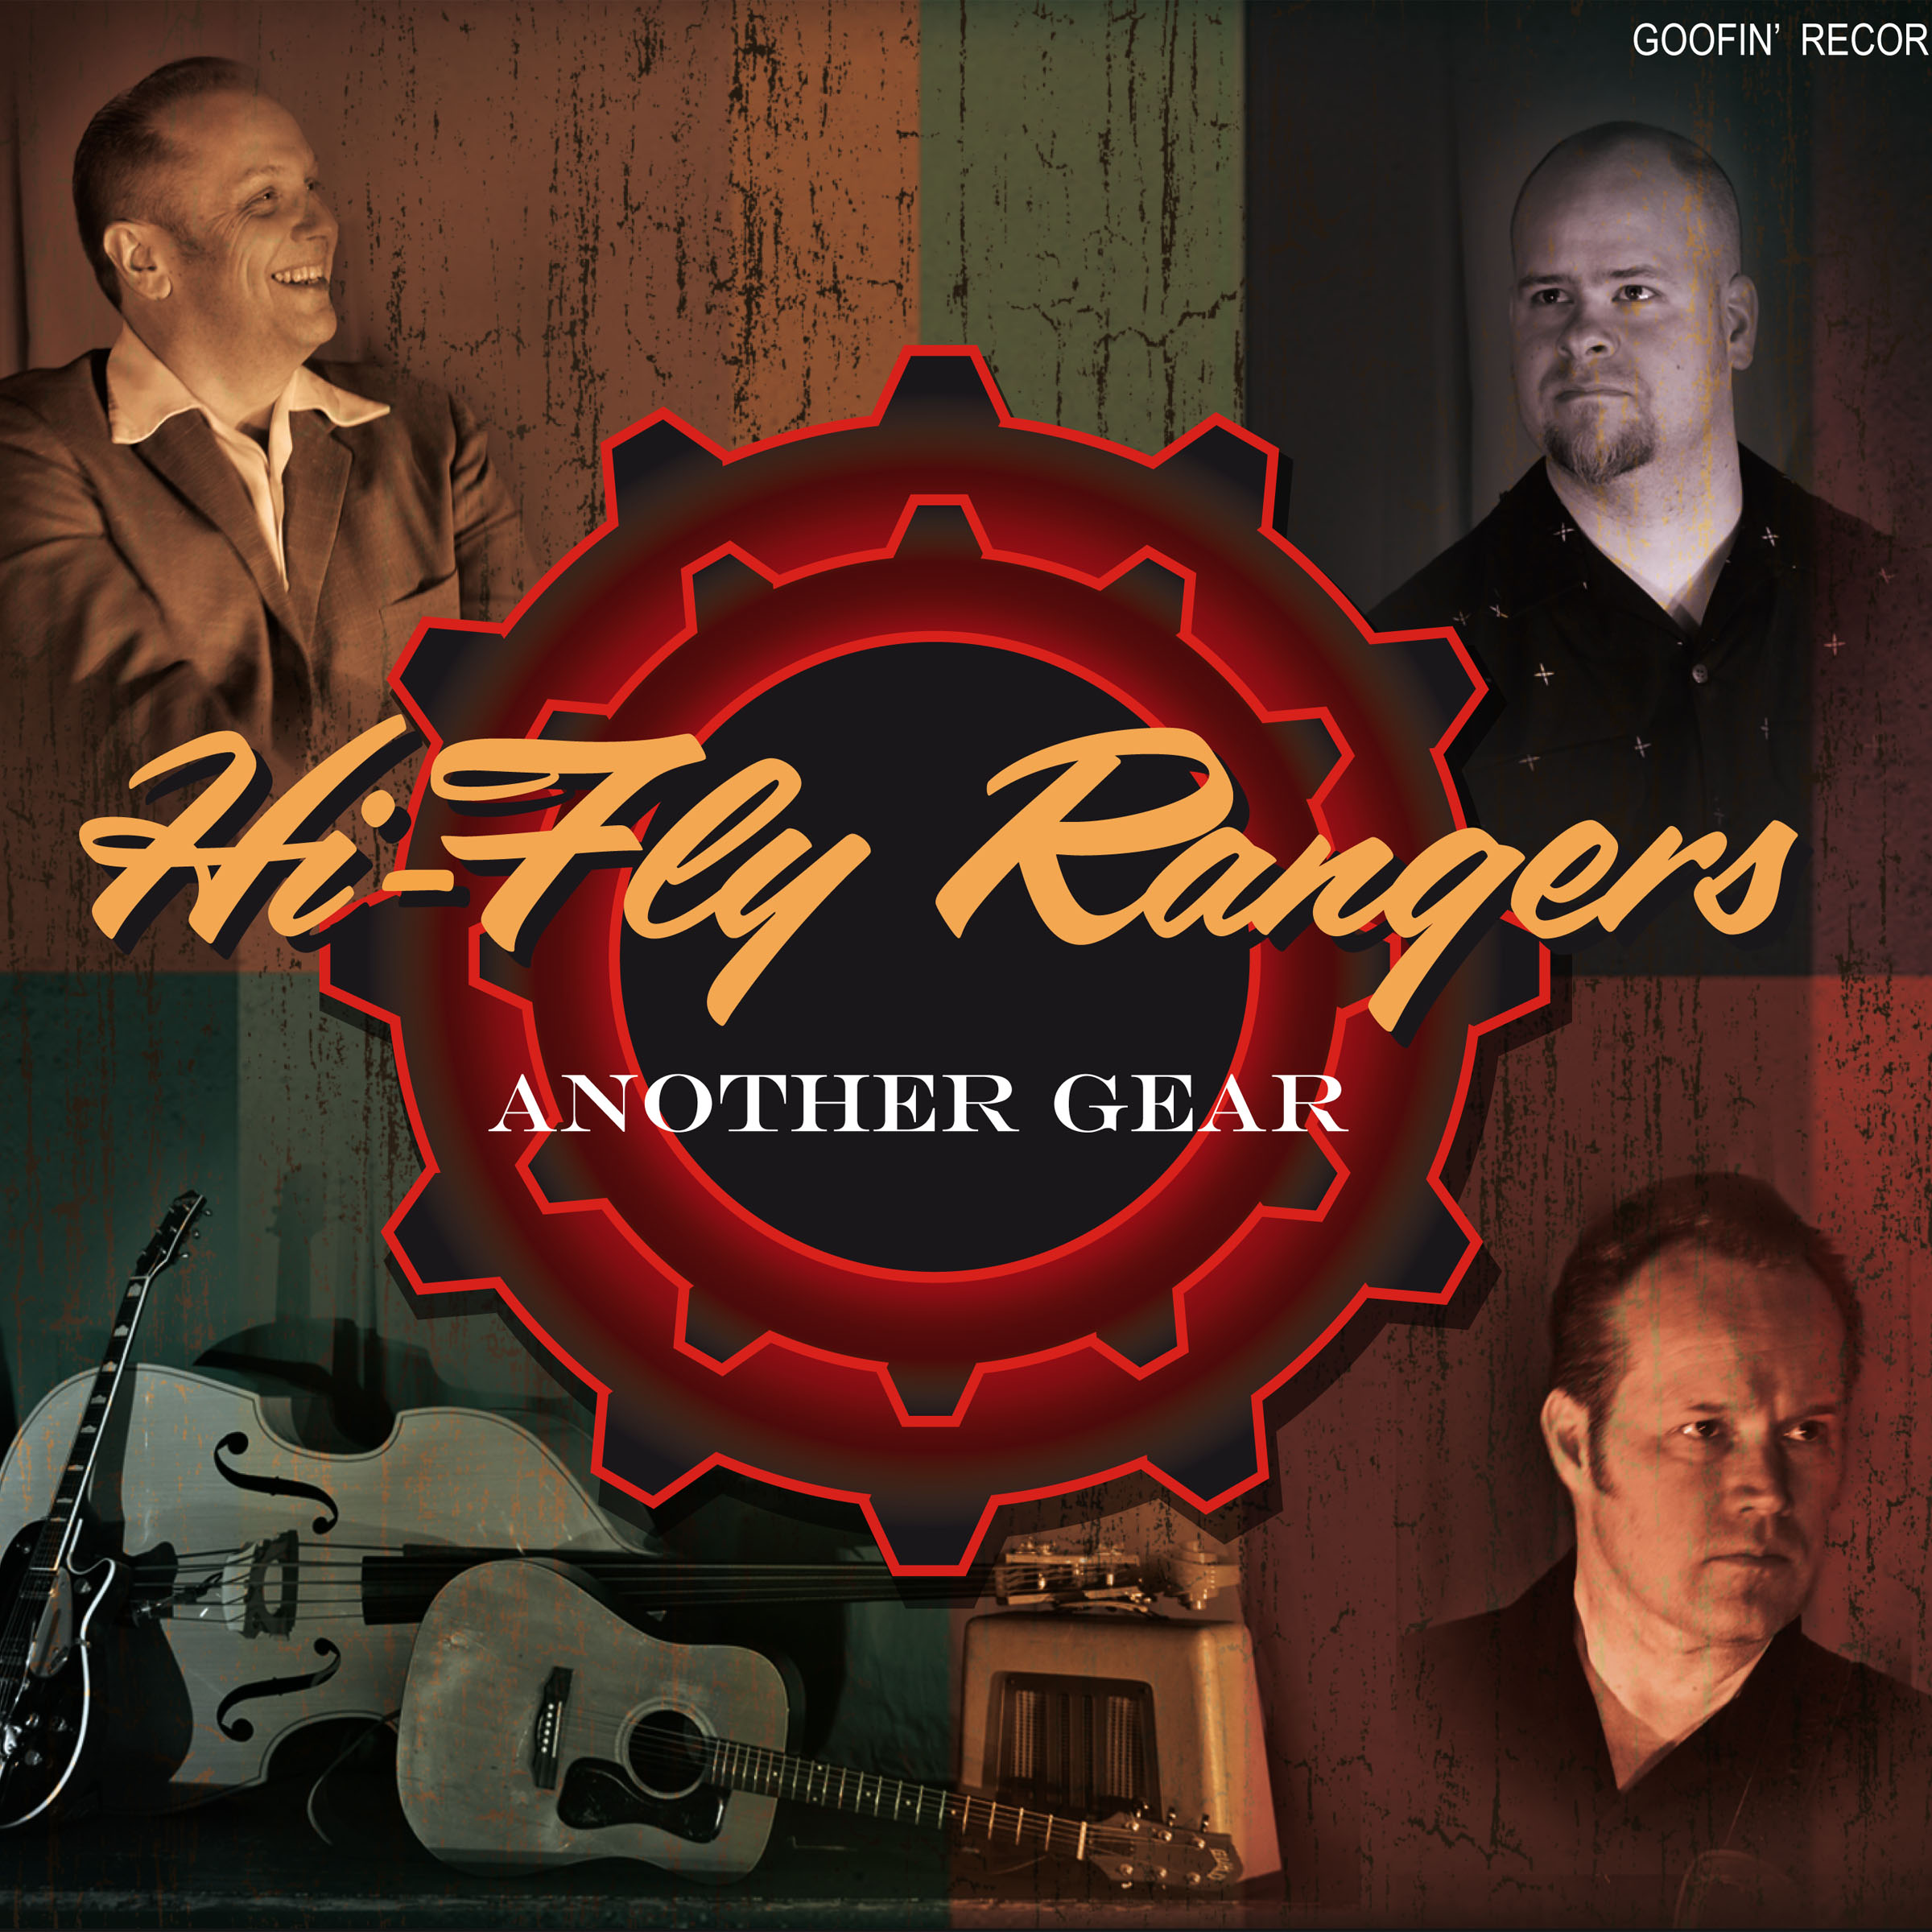 Hi-Fly Rangers - Another Gear - CD